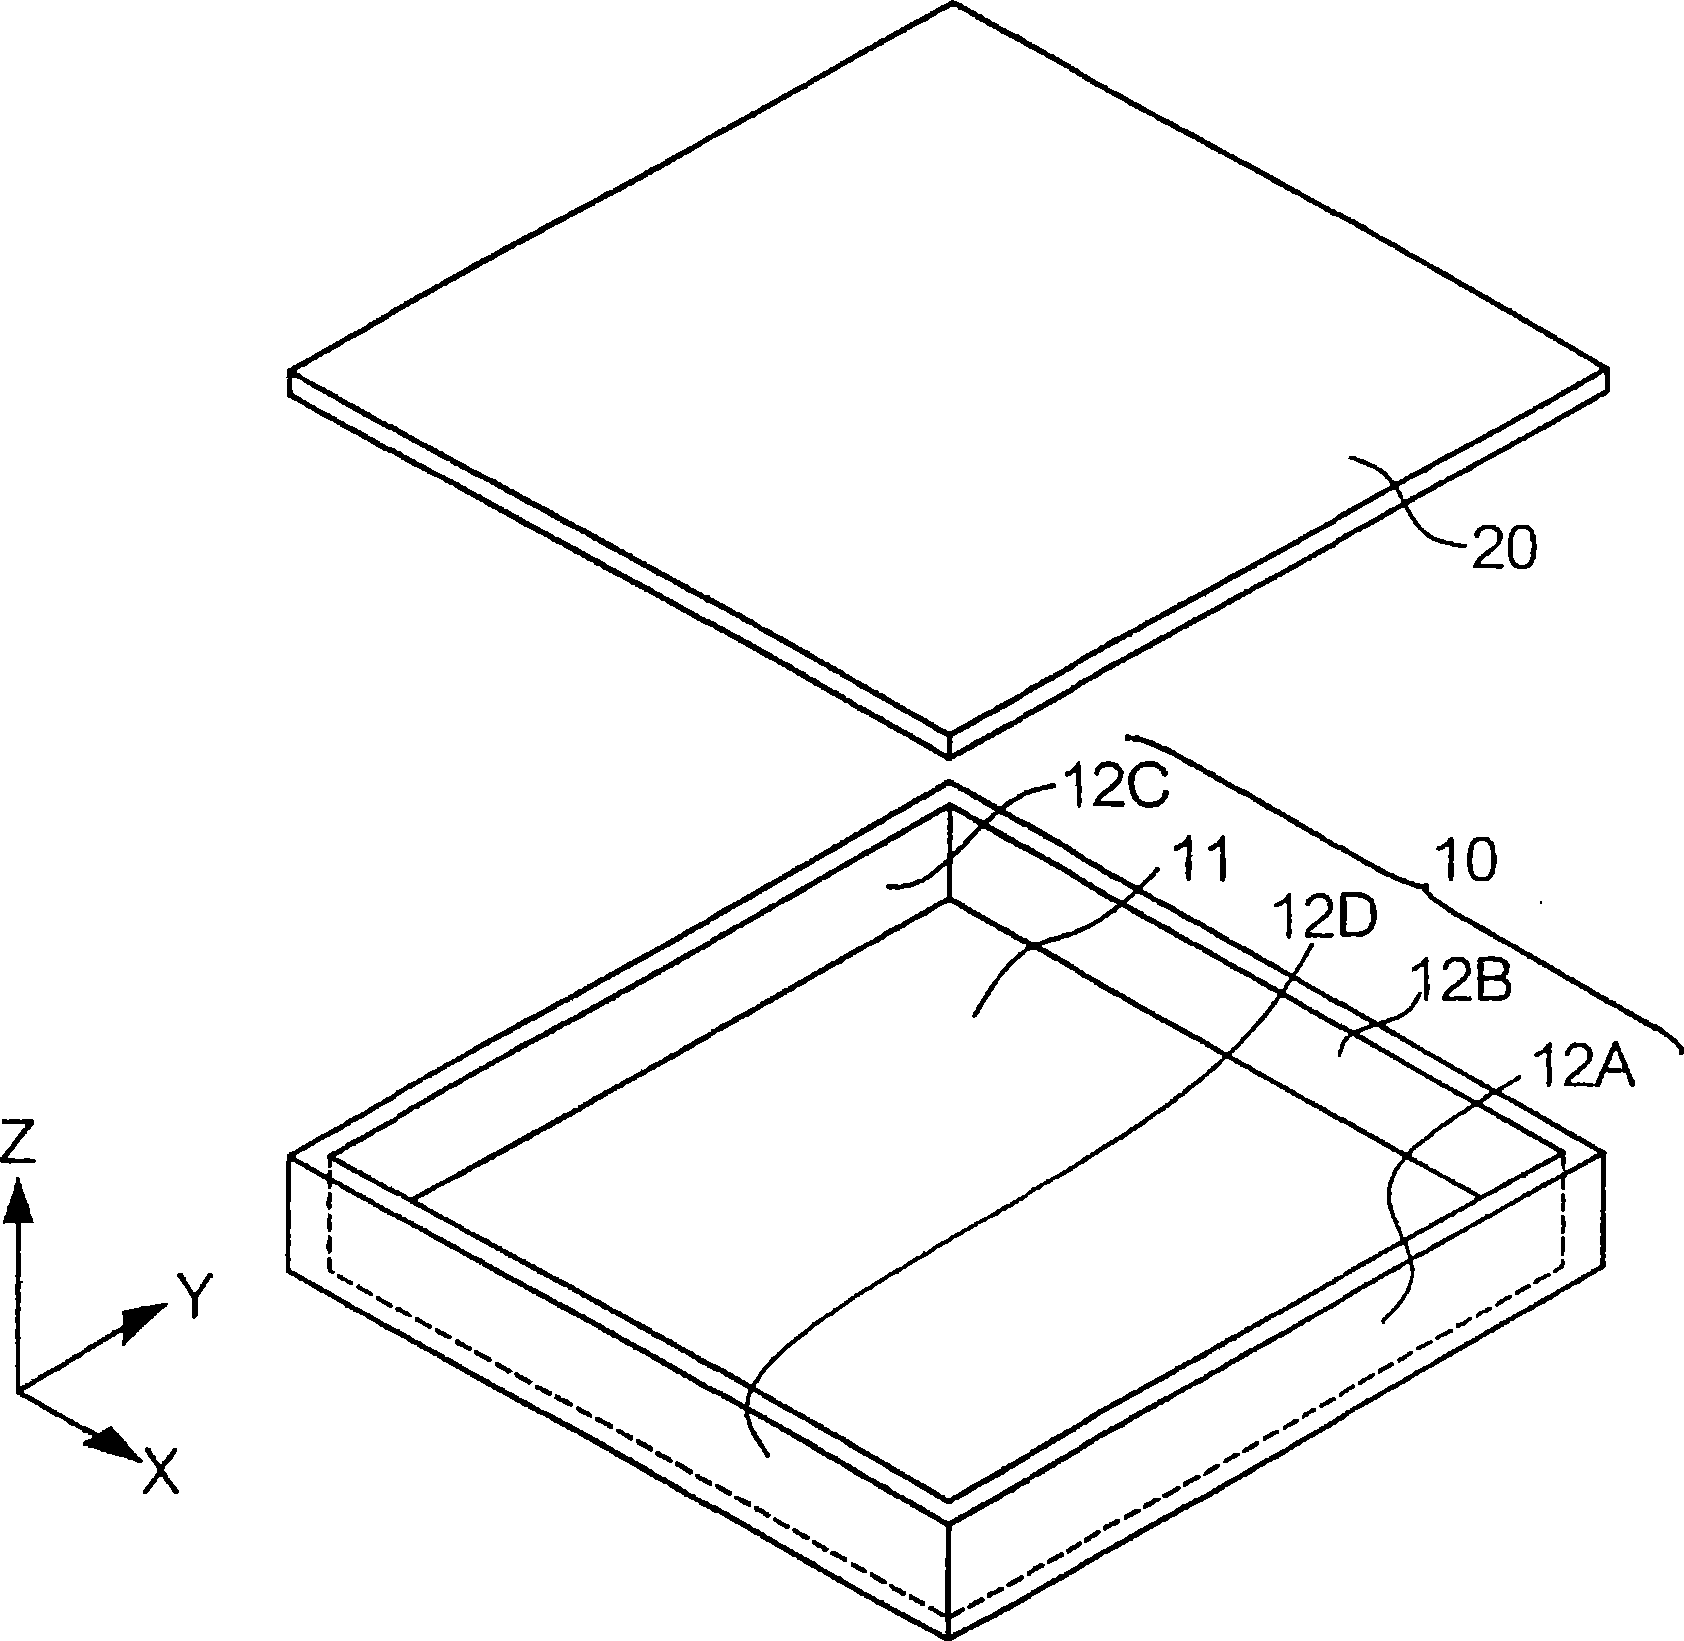 Sound absorbing structure and vehicle component having sound absorbing properties